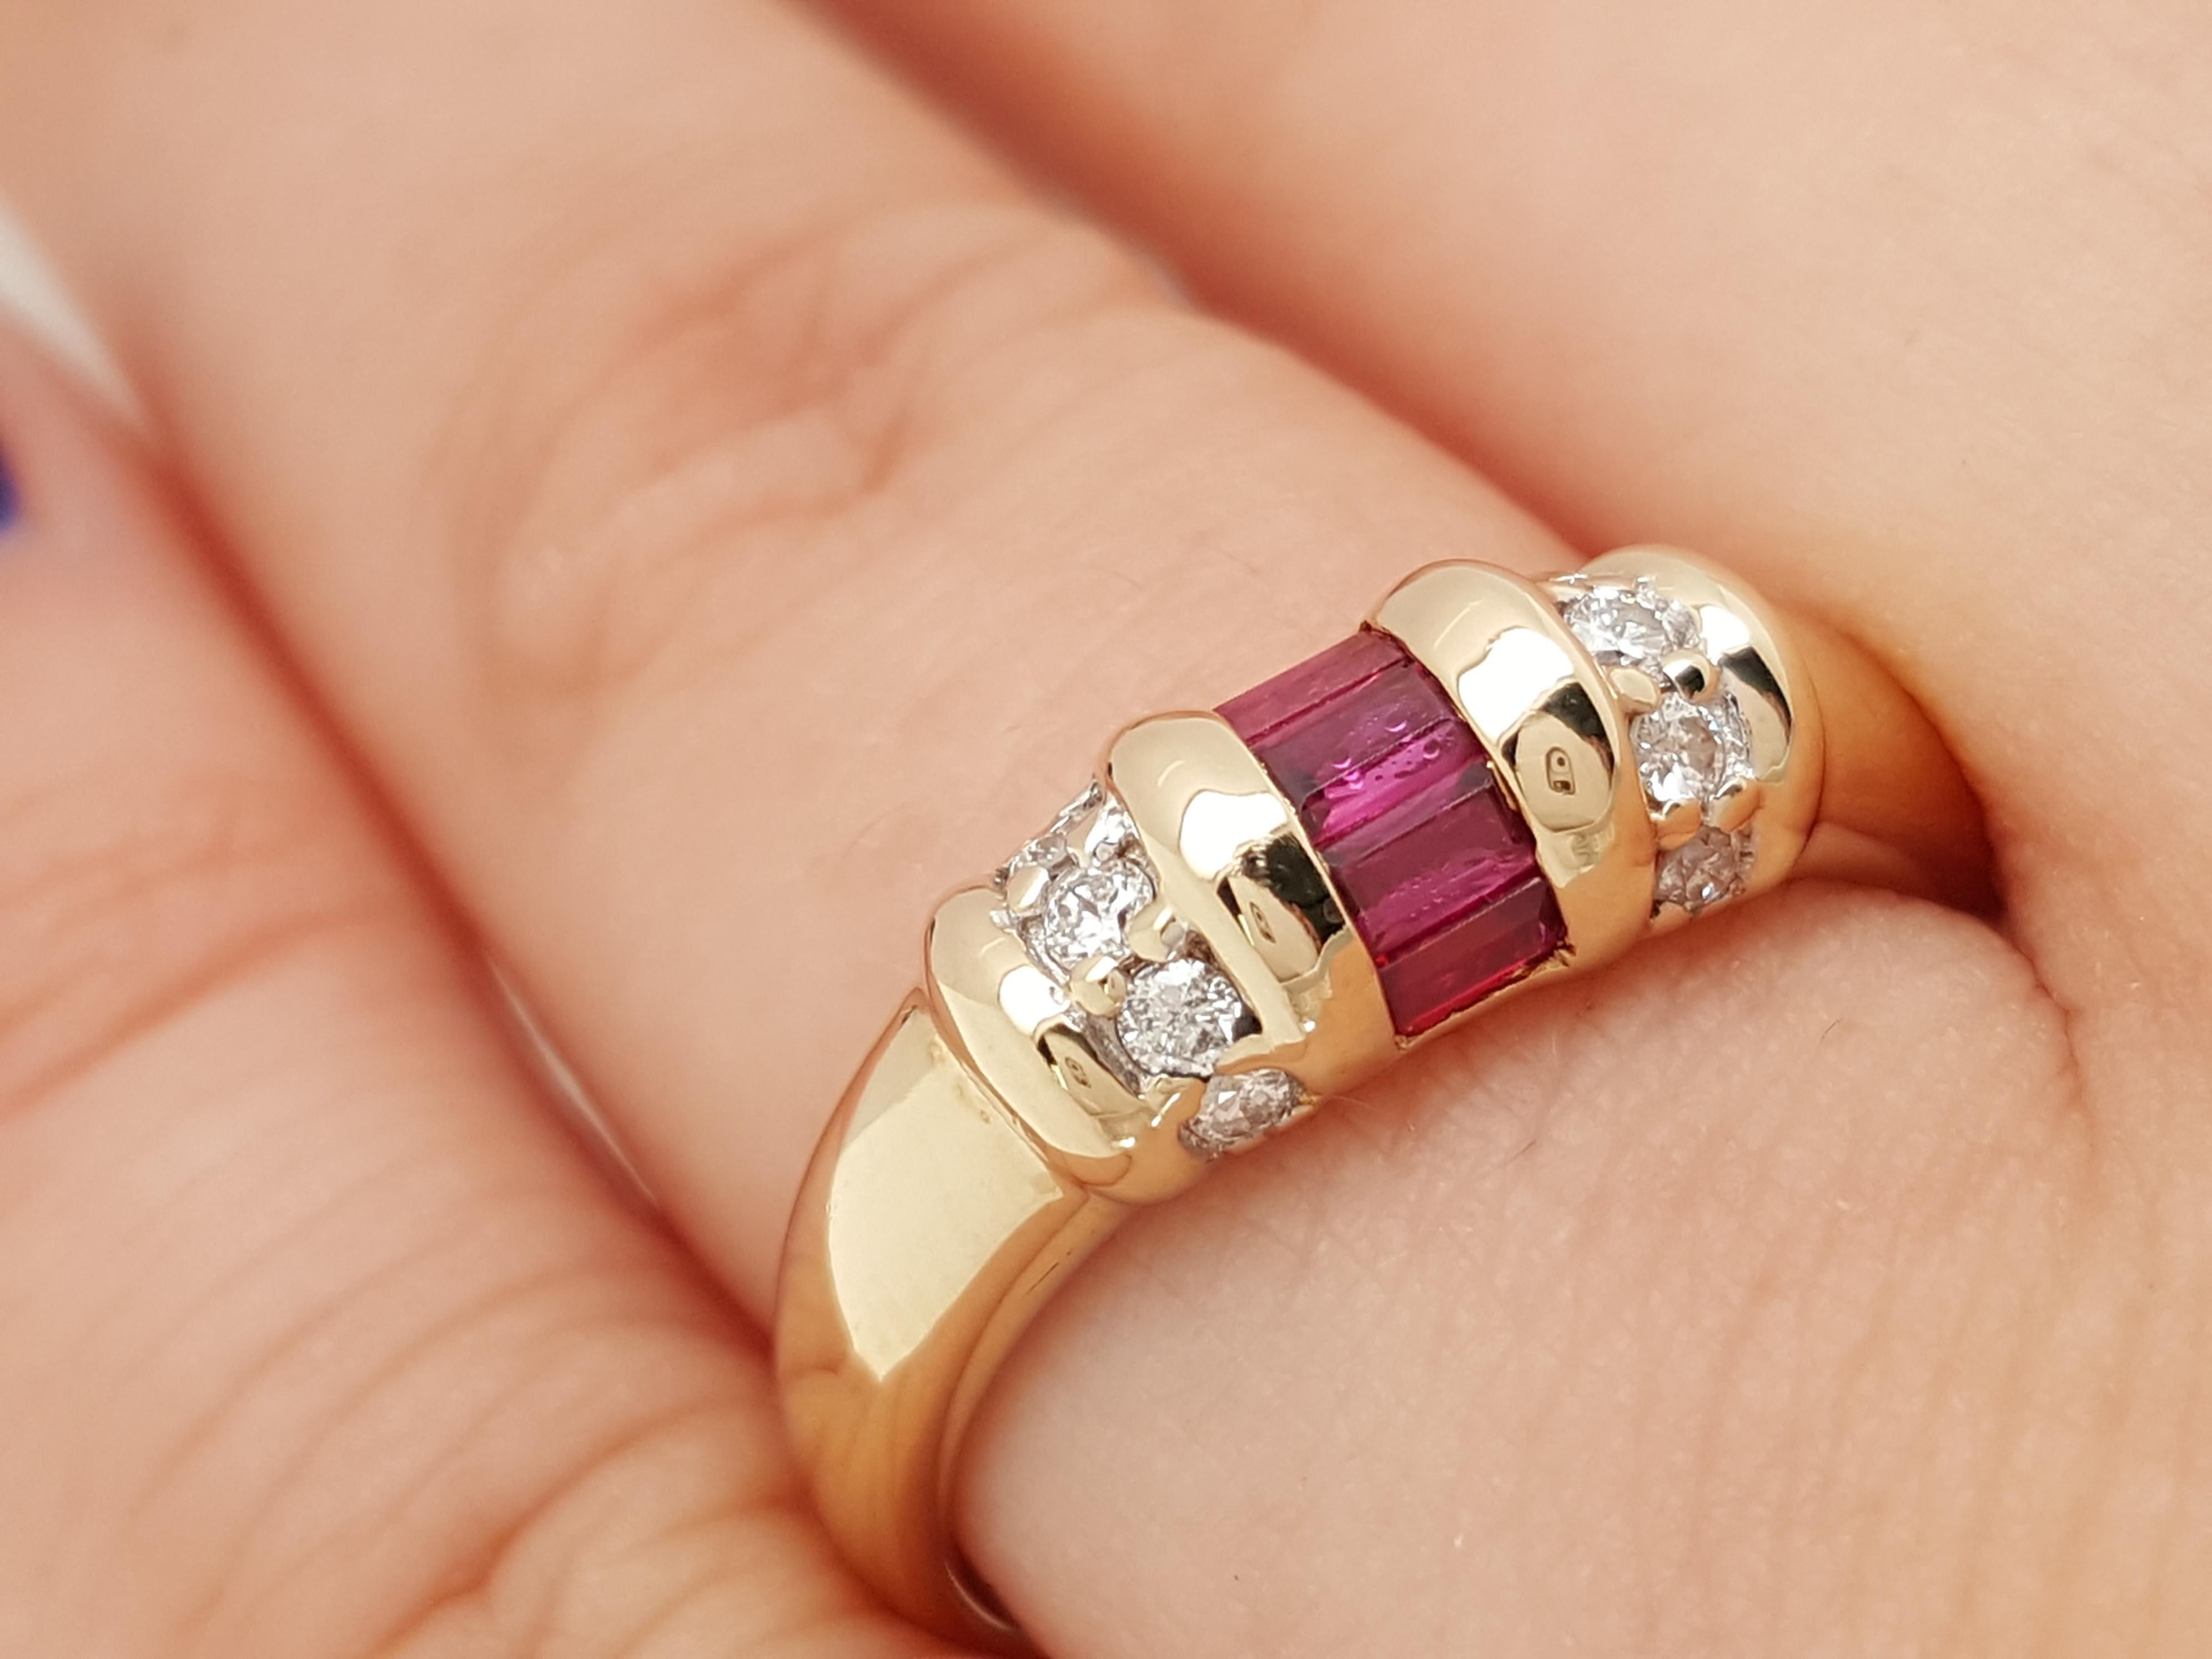 This is an exquisite example of a vintage ruby diamond band. It is crafted in yellow gold and the center features 5 baguette blood red rubies of the finest quality accented with 6 round brilliant cut diamonds .  This would make an excellent addition